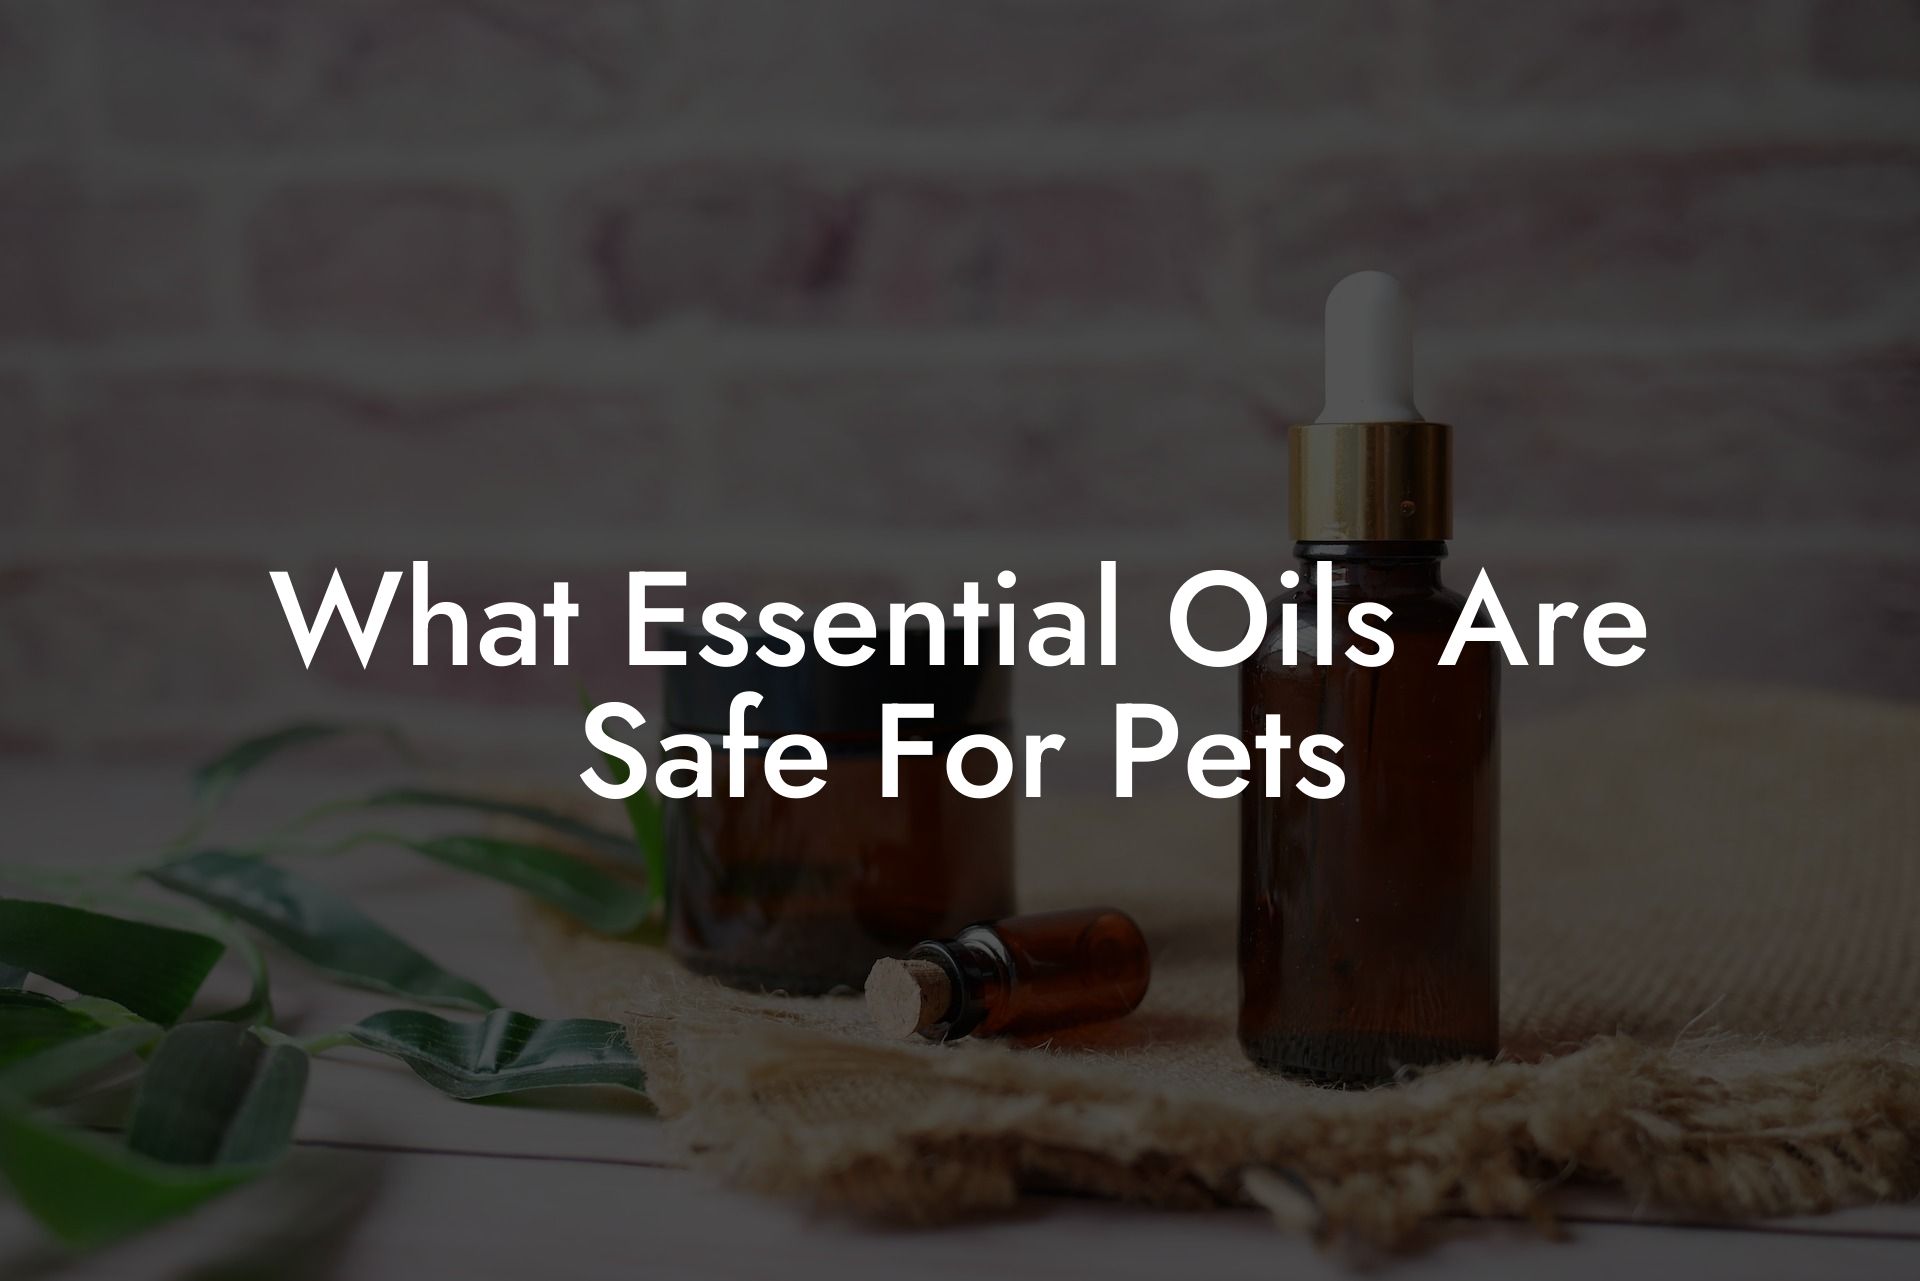 What Essential Oils Are Safe For Pets